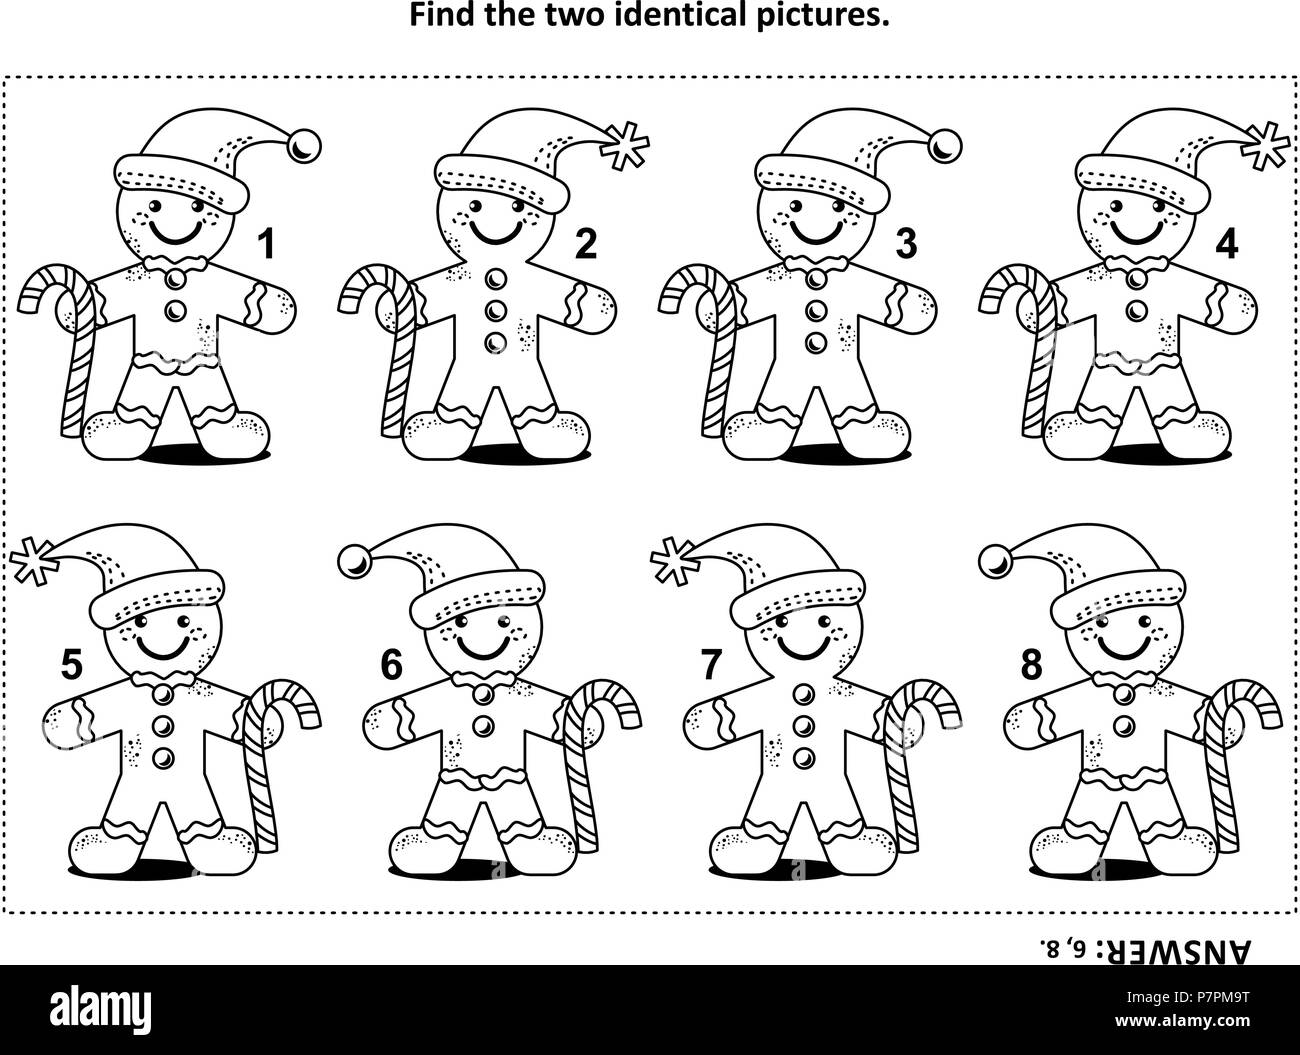 IQ training find the two identical pictures with ginger man visual puzzle and coloring page. Answer included. Stock Vector